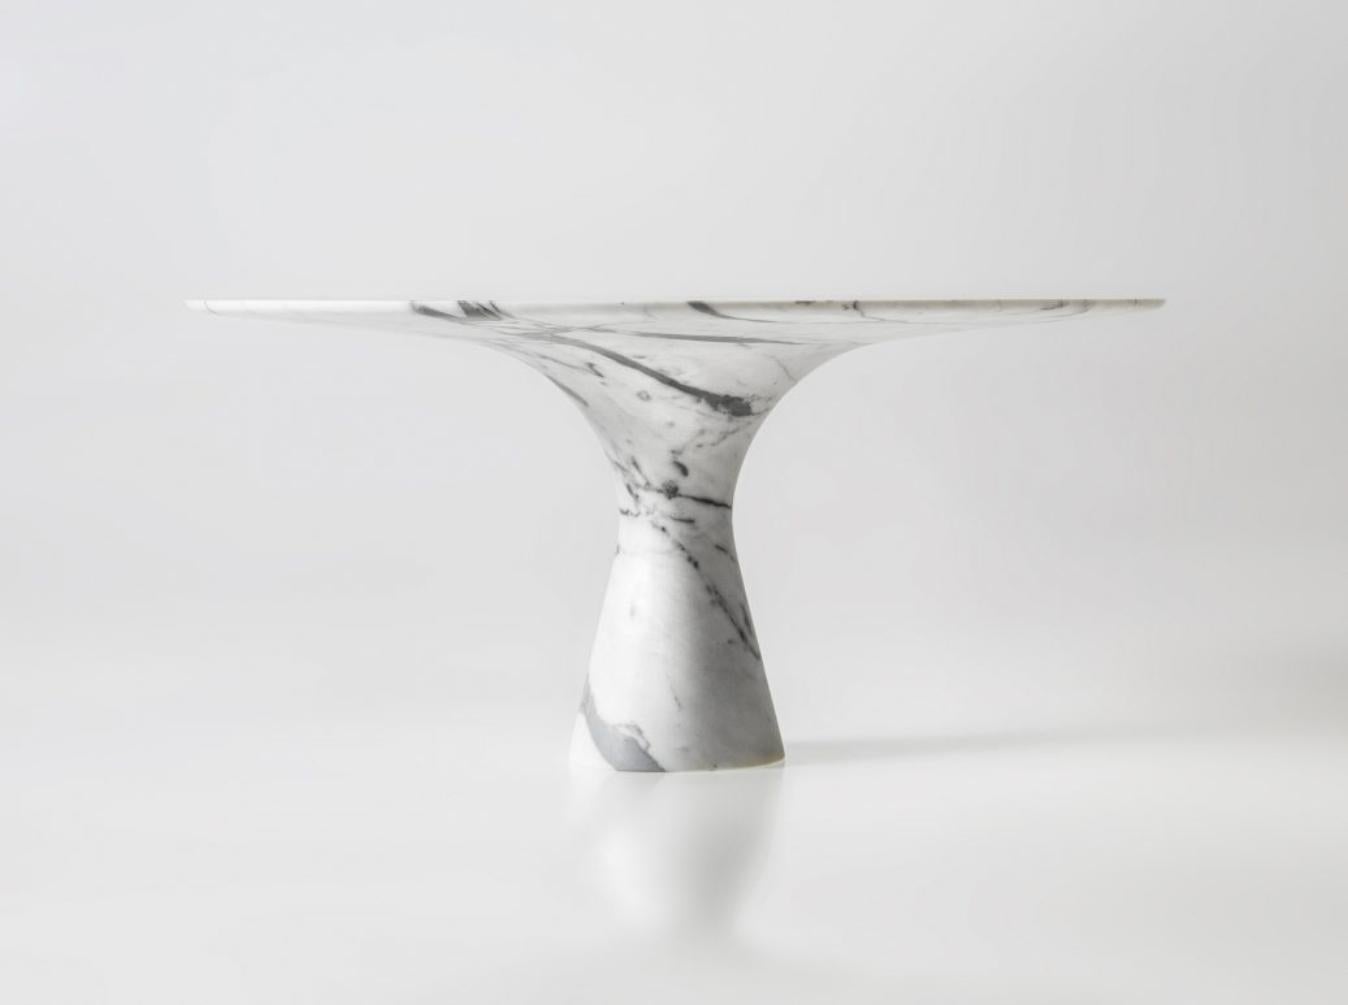 Bianco Statuarietto Refined Contemporary Marble Dining Table 130/75
Dimensions: 130 x 75 cm
Materials: Bianco Statuarietto
Angelo is the essence of a round table in natural stone, a sculptural shape in robust material with elegant lines and